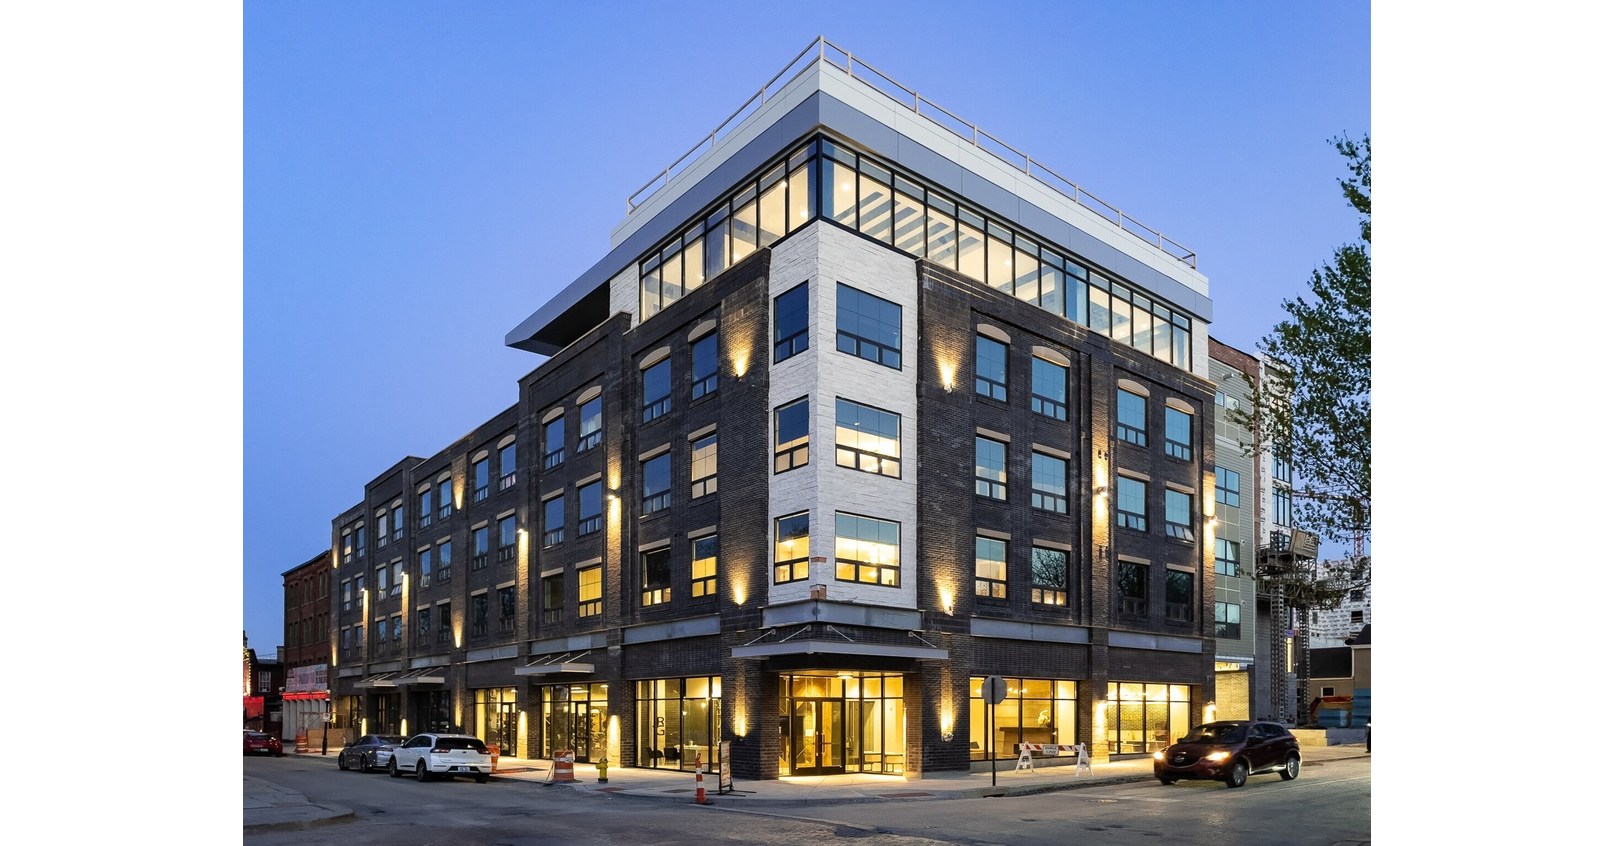 Stoneweg U.S. LLC Acquires 178-Unit Apartment Community JRG Lofts in Cincinnati, OH; Expanding its Geographic Footprint in the Midwest